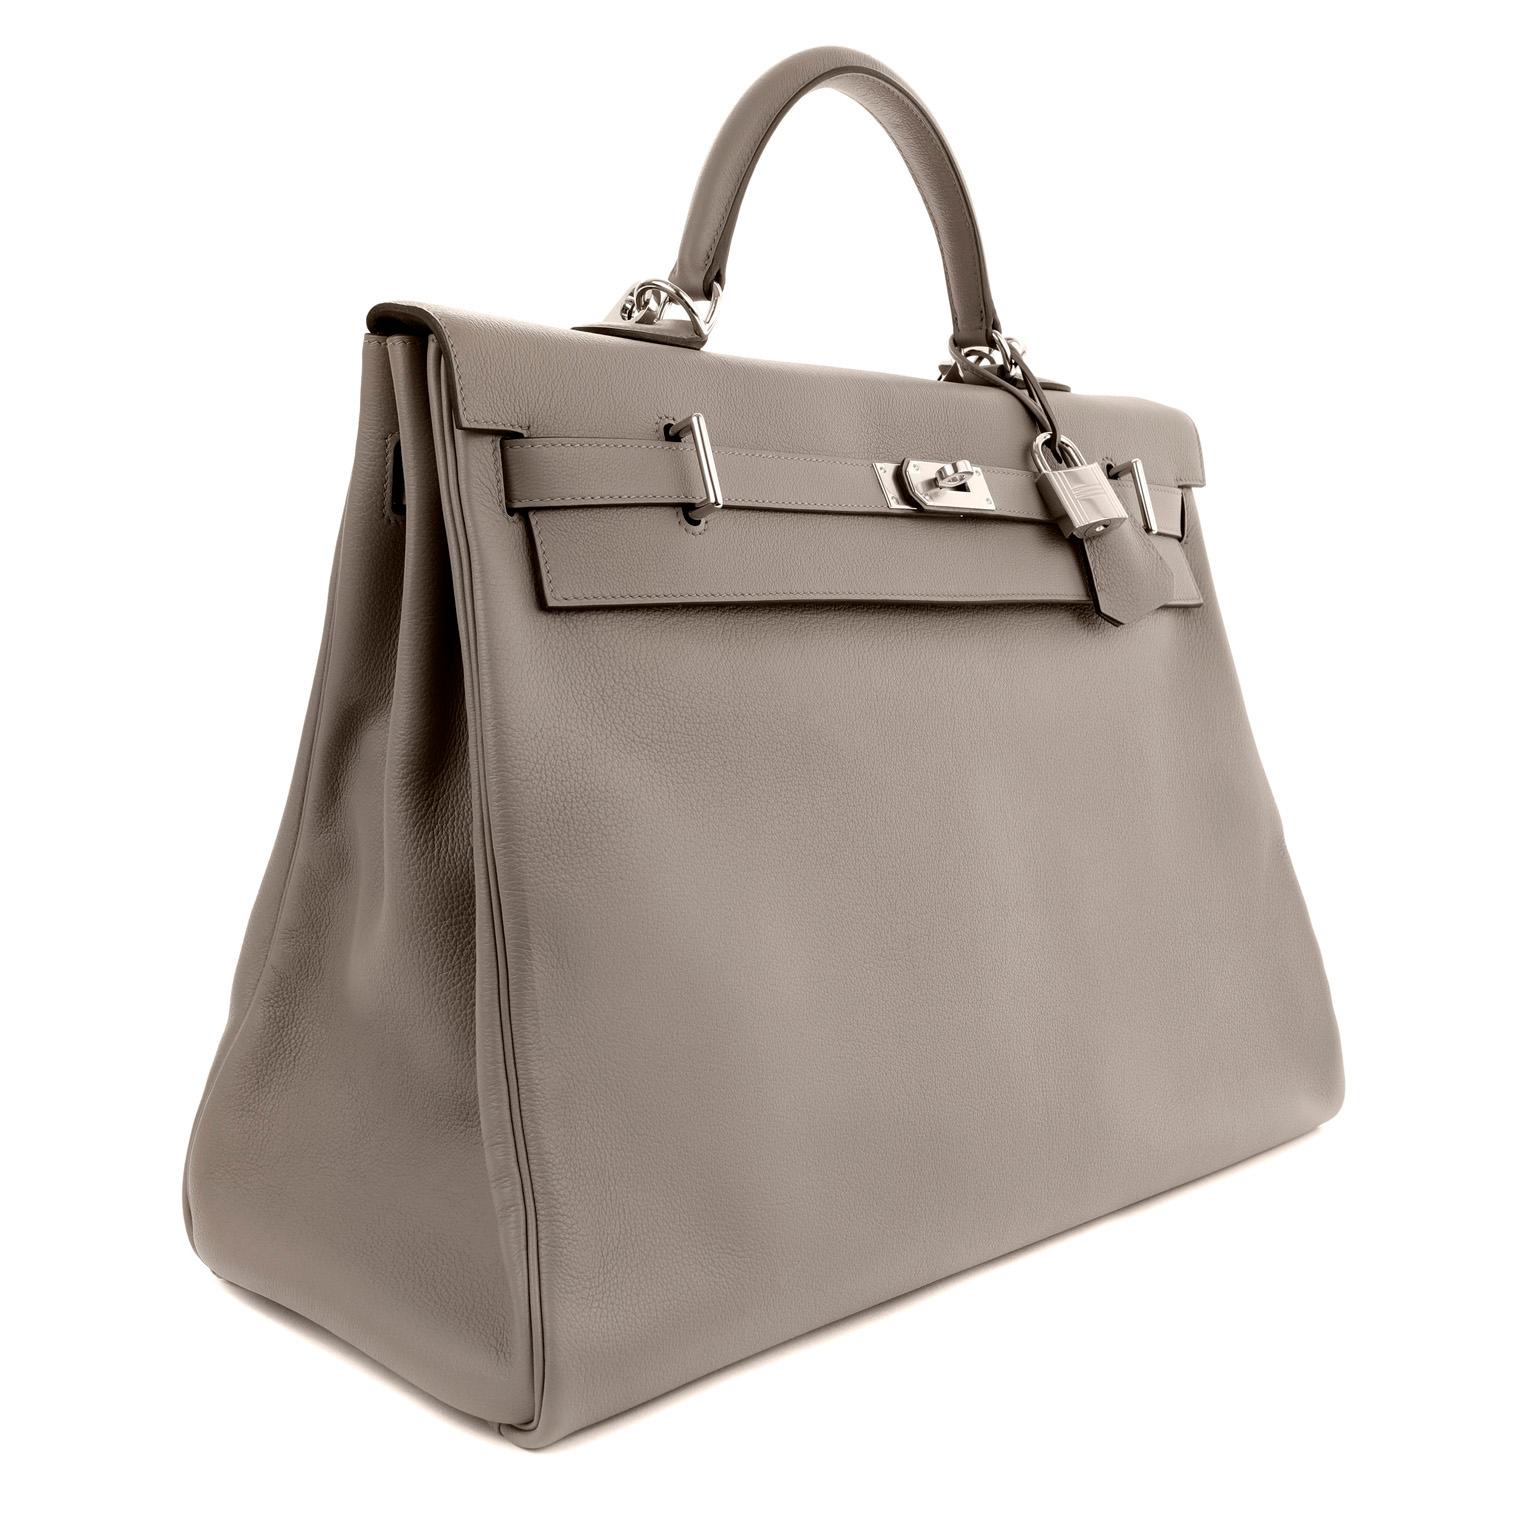 This authentic Hermès 50 cm Grey Evercolor Voyage Kelly is in pristine condition with the protective plastic intact on the hardware.   Hermès bags are considered the ultimate luxury item worldwide.  Each piece is handcrafted with waitlists that can